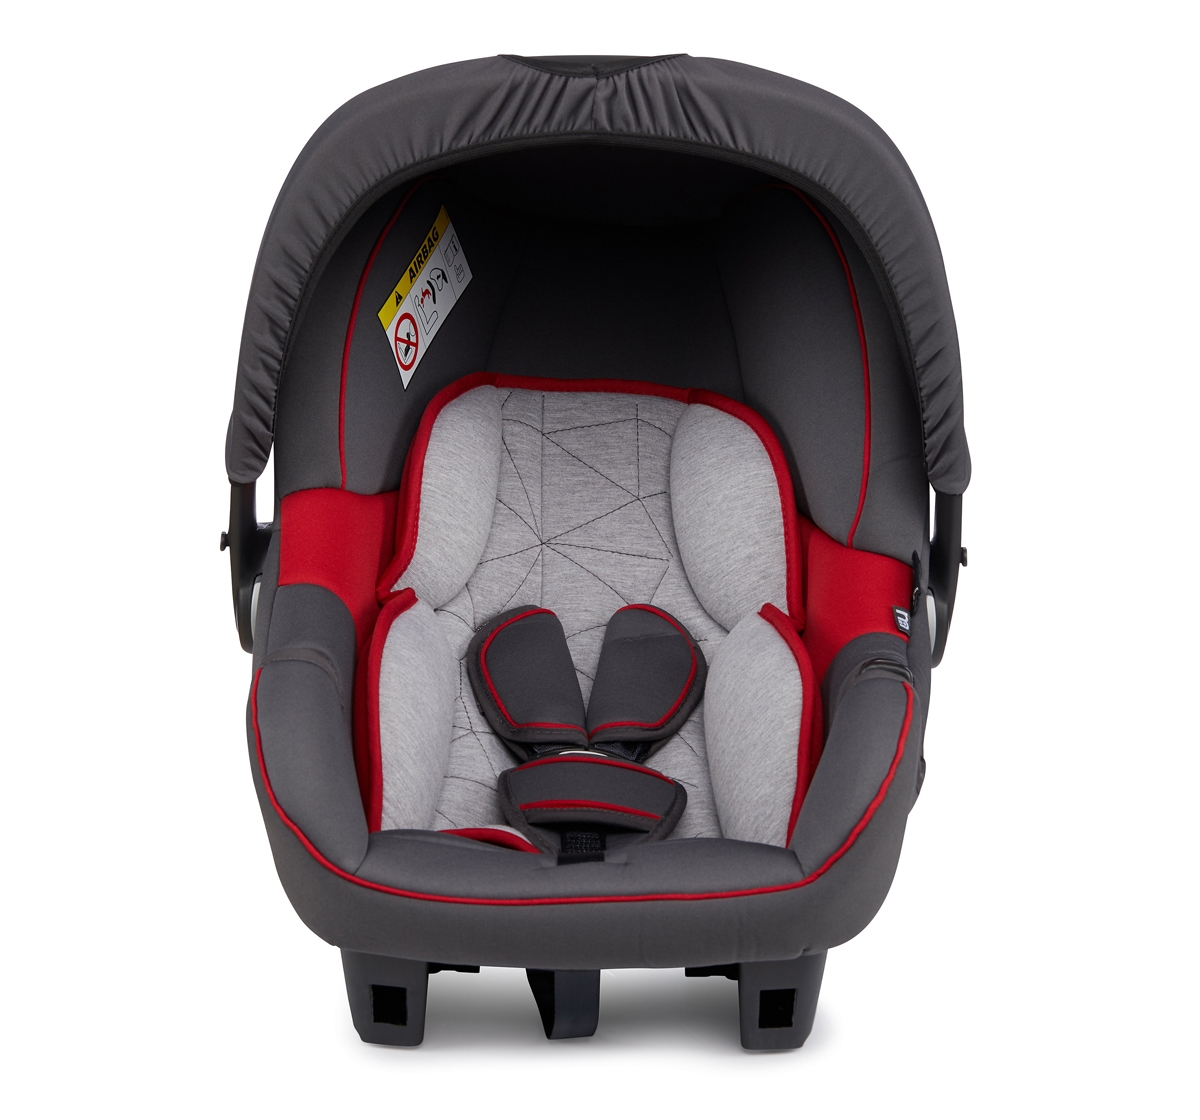 Mothercare | Mothercare Car Seat Ziba Grey And Red Multicolor 0